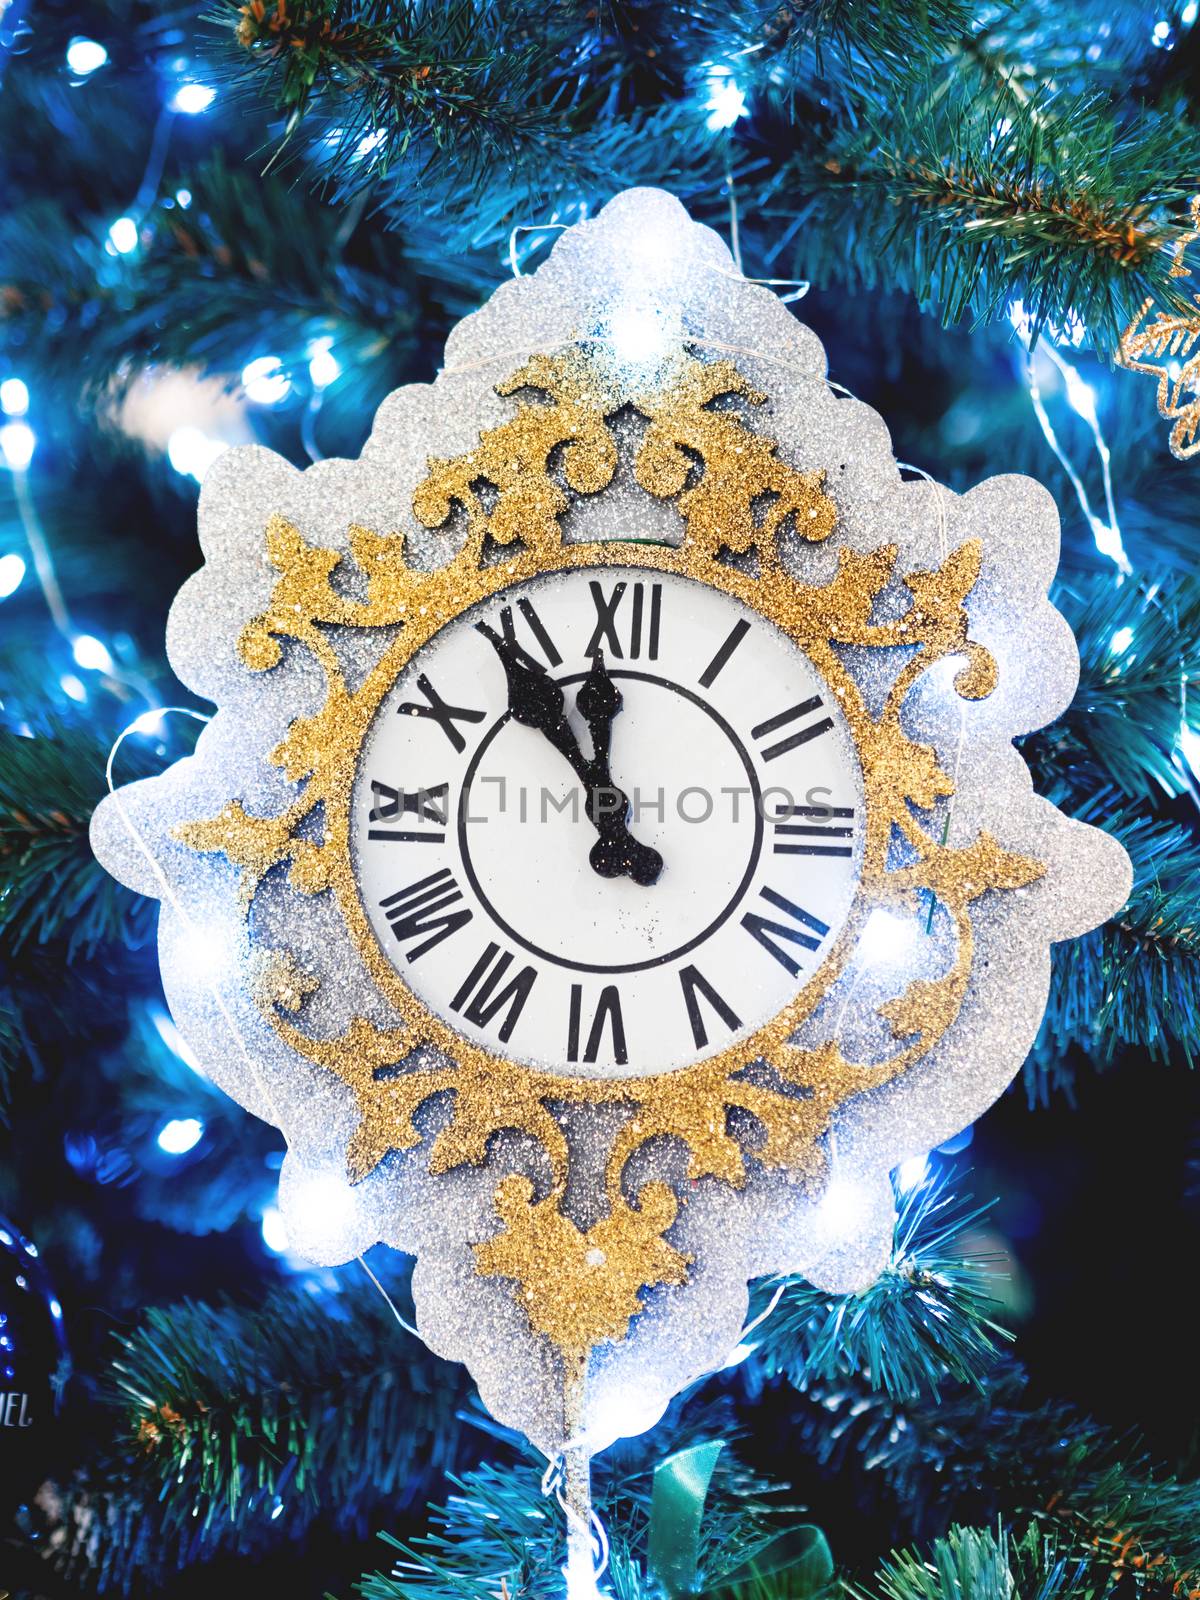 Decorative watch made of spangles. New Year decoration for Christmas tree.